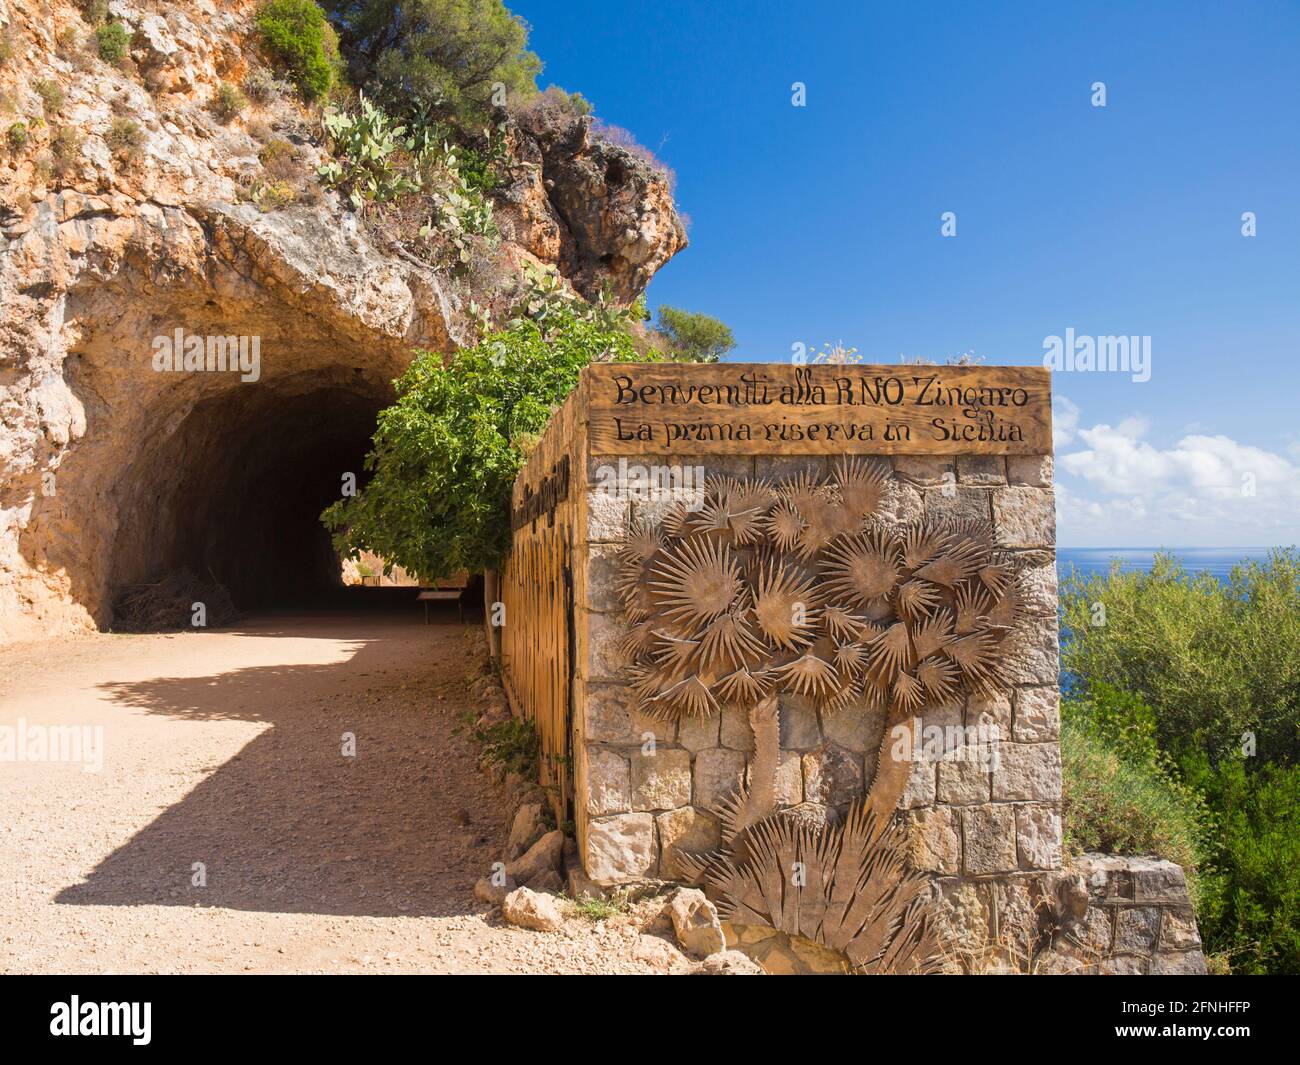 Scopello, Trapani, Sicily, Italy. Eye-catching sign above the Gulf of Castellammare marking southern entrance to the Zingaro Nature Reserve. Stock Photo